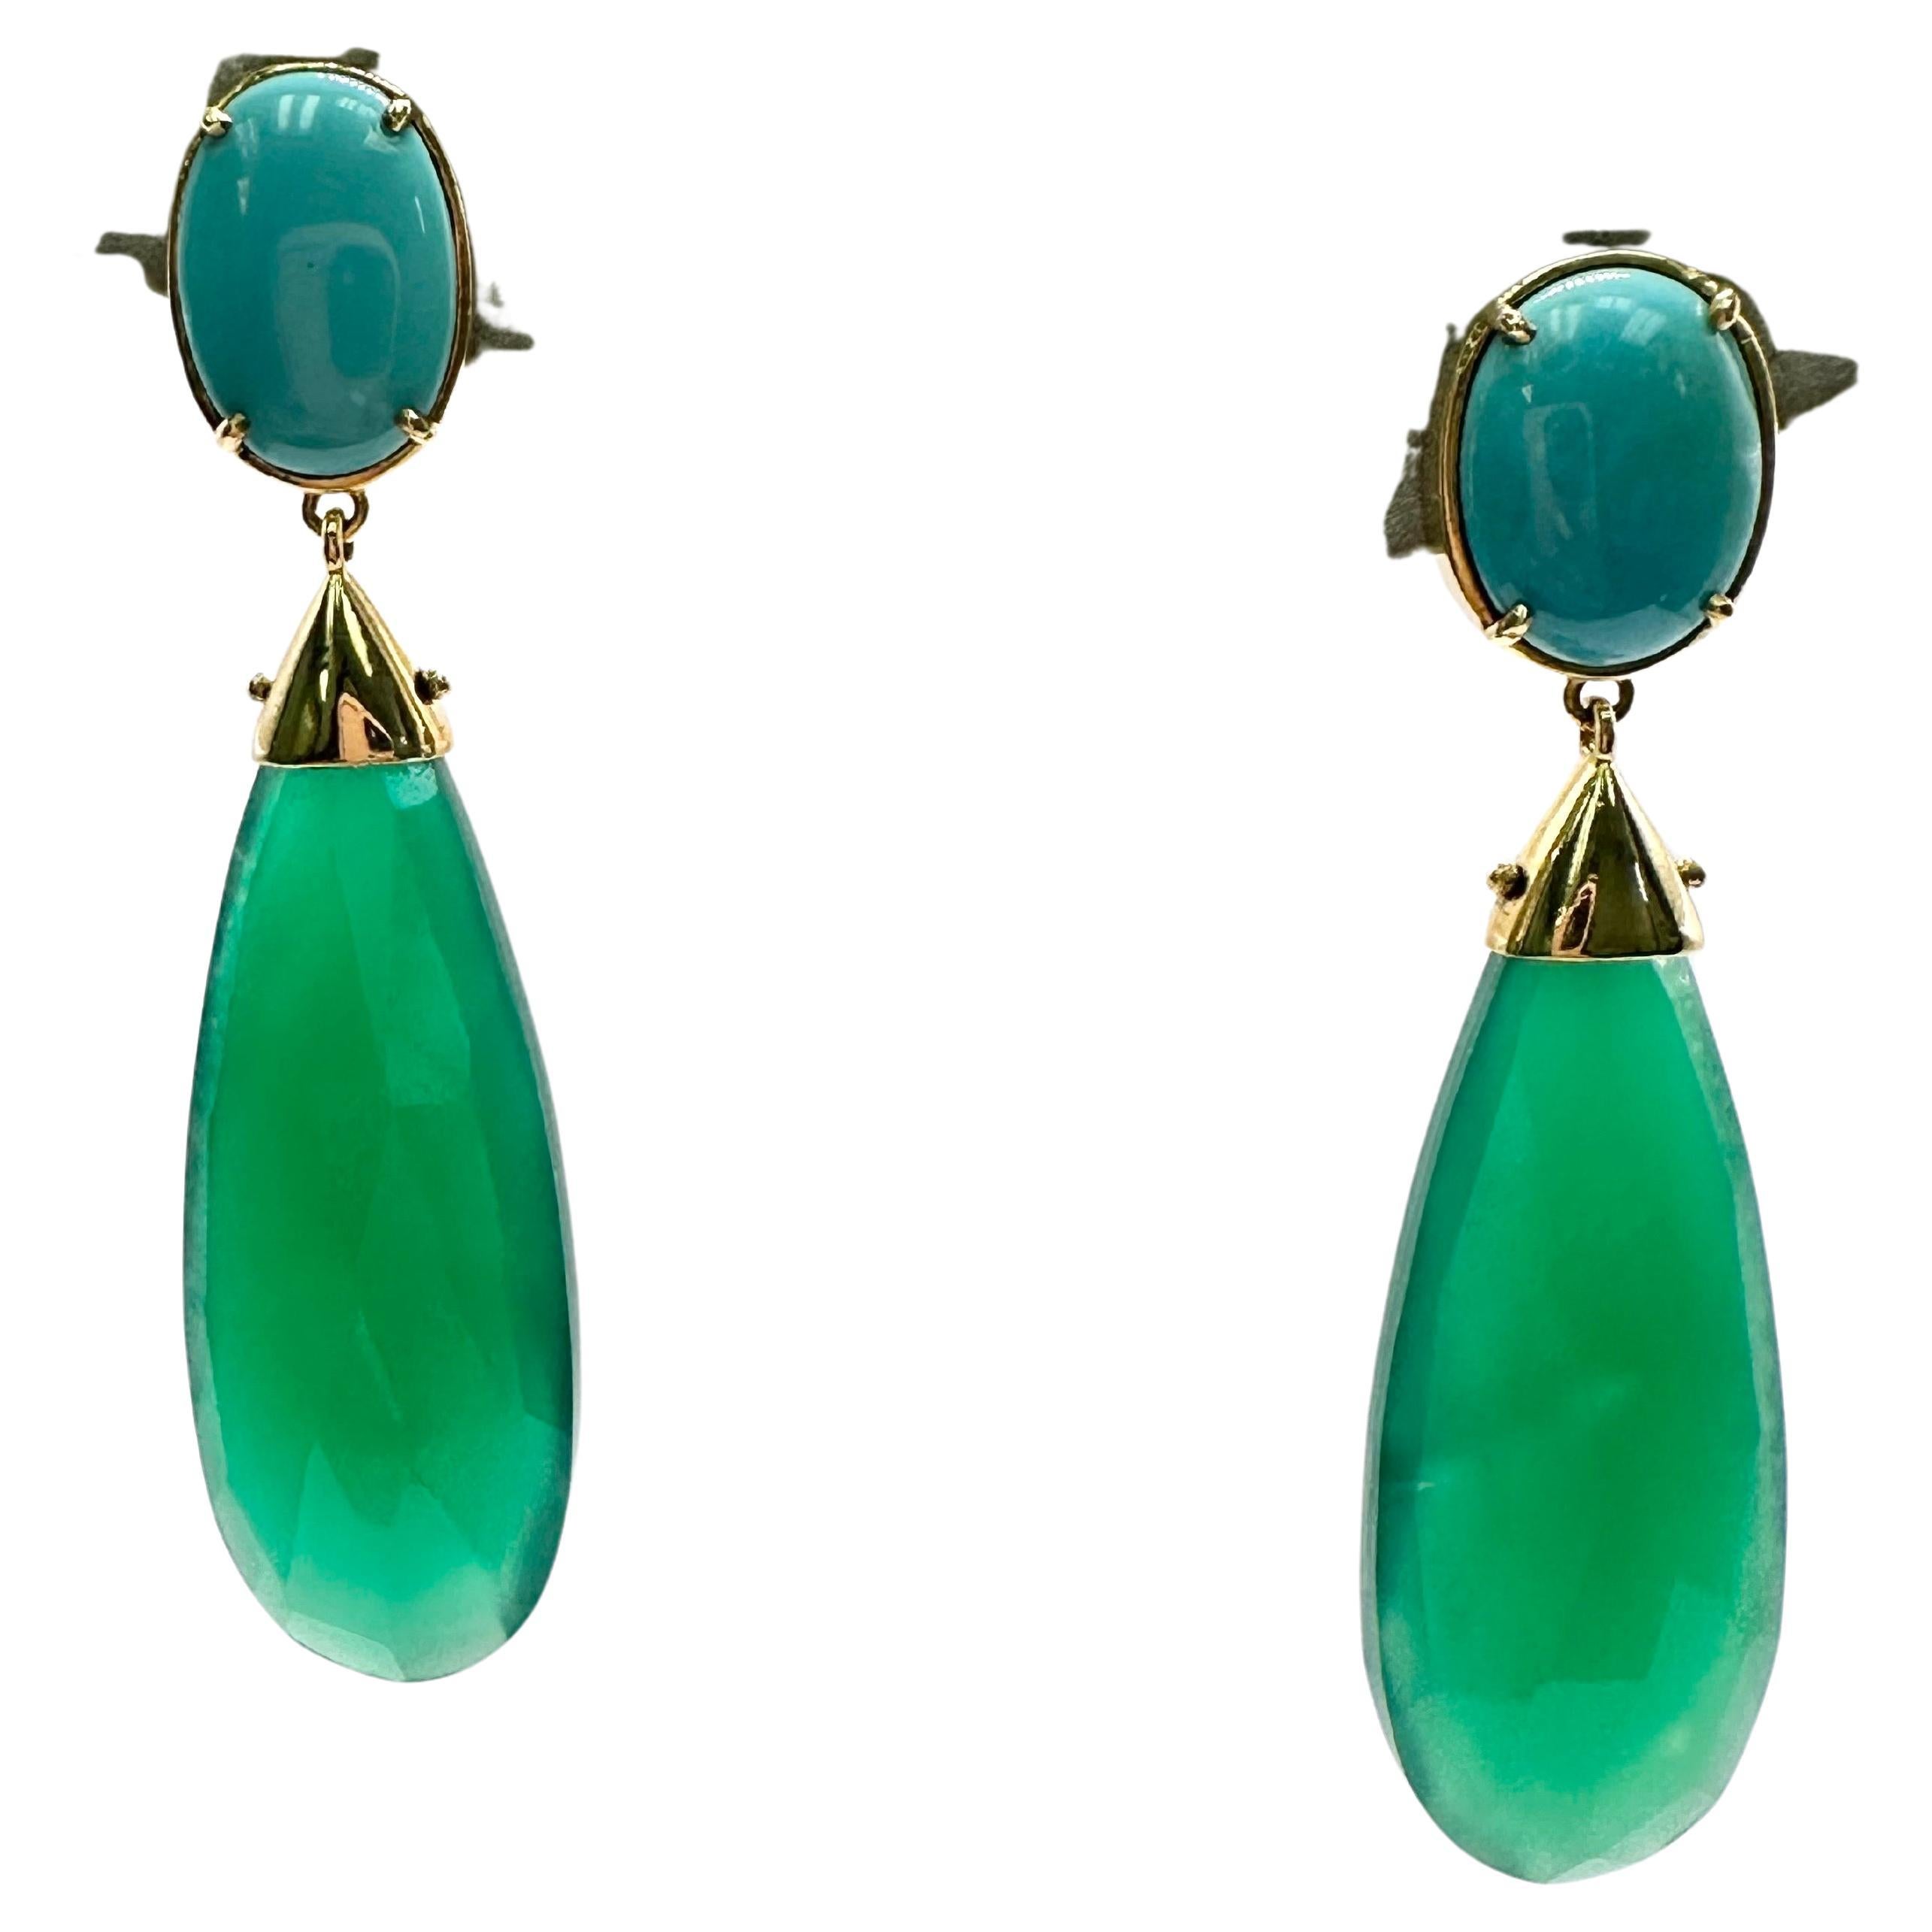 Tourquise Aventurine Long earrings 18KT gold For Sale